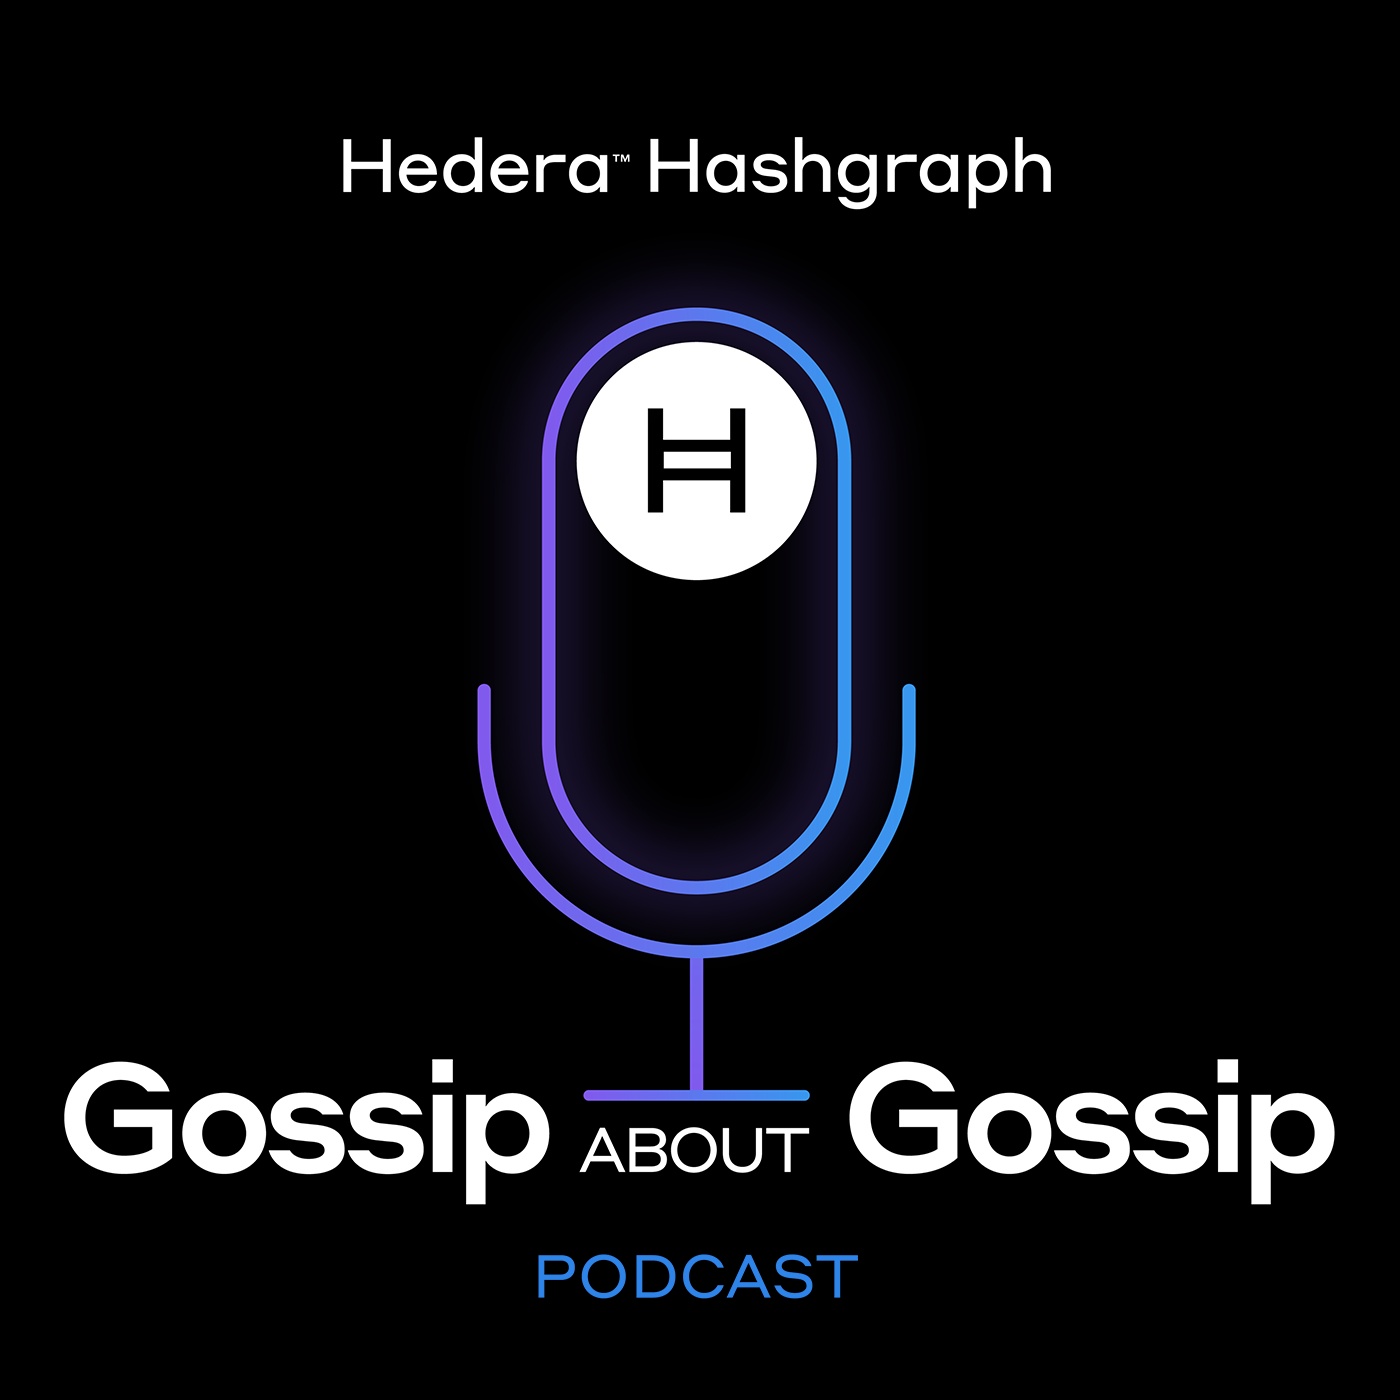 Charting the Decentralized Webs Moral Compass with World Forum - Hedera Hashgraph - Gossip About Gossip Podcast